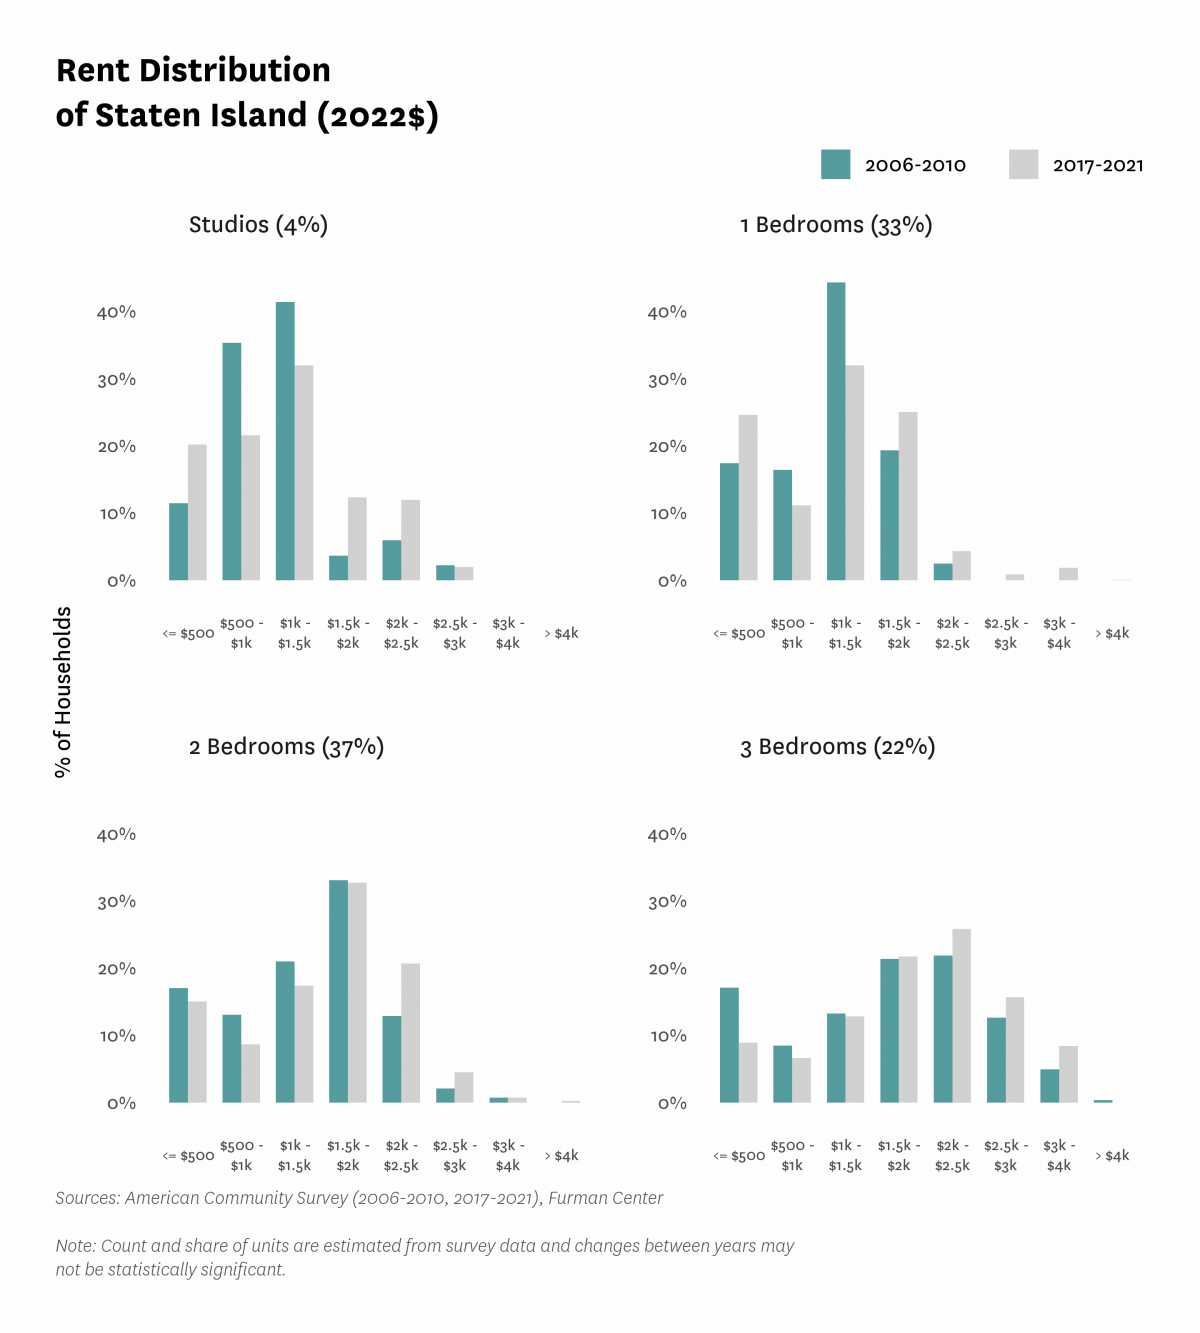 Graph showing the distribution of rents in Staten Island in both 2010 and 2017-2021.